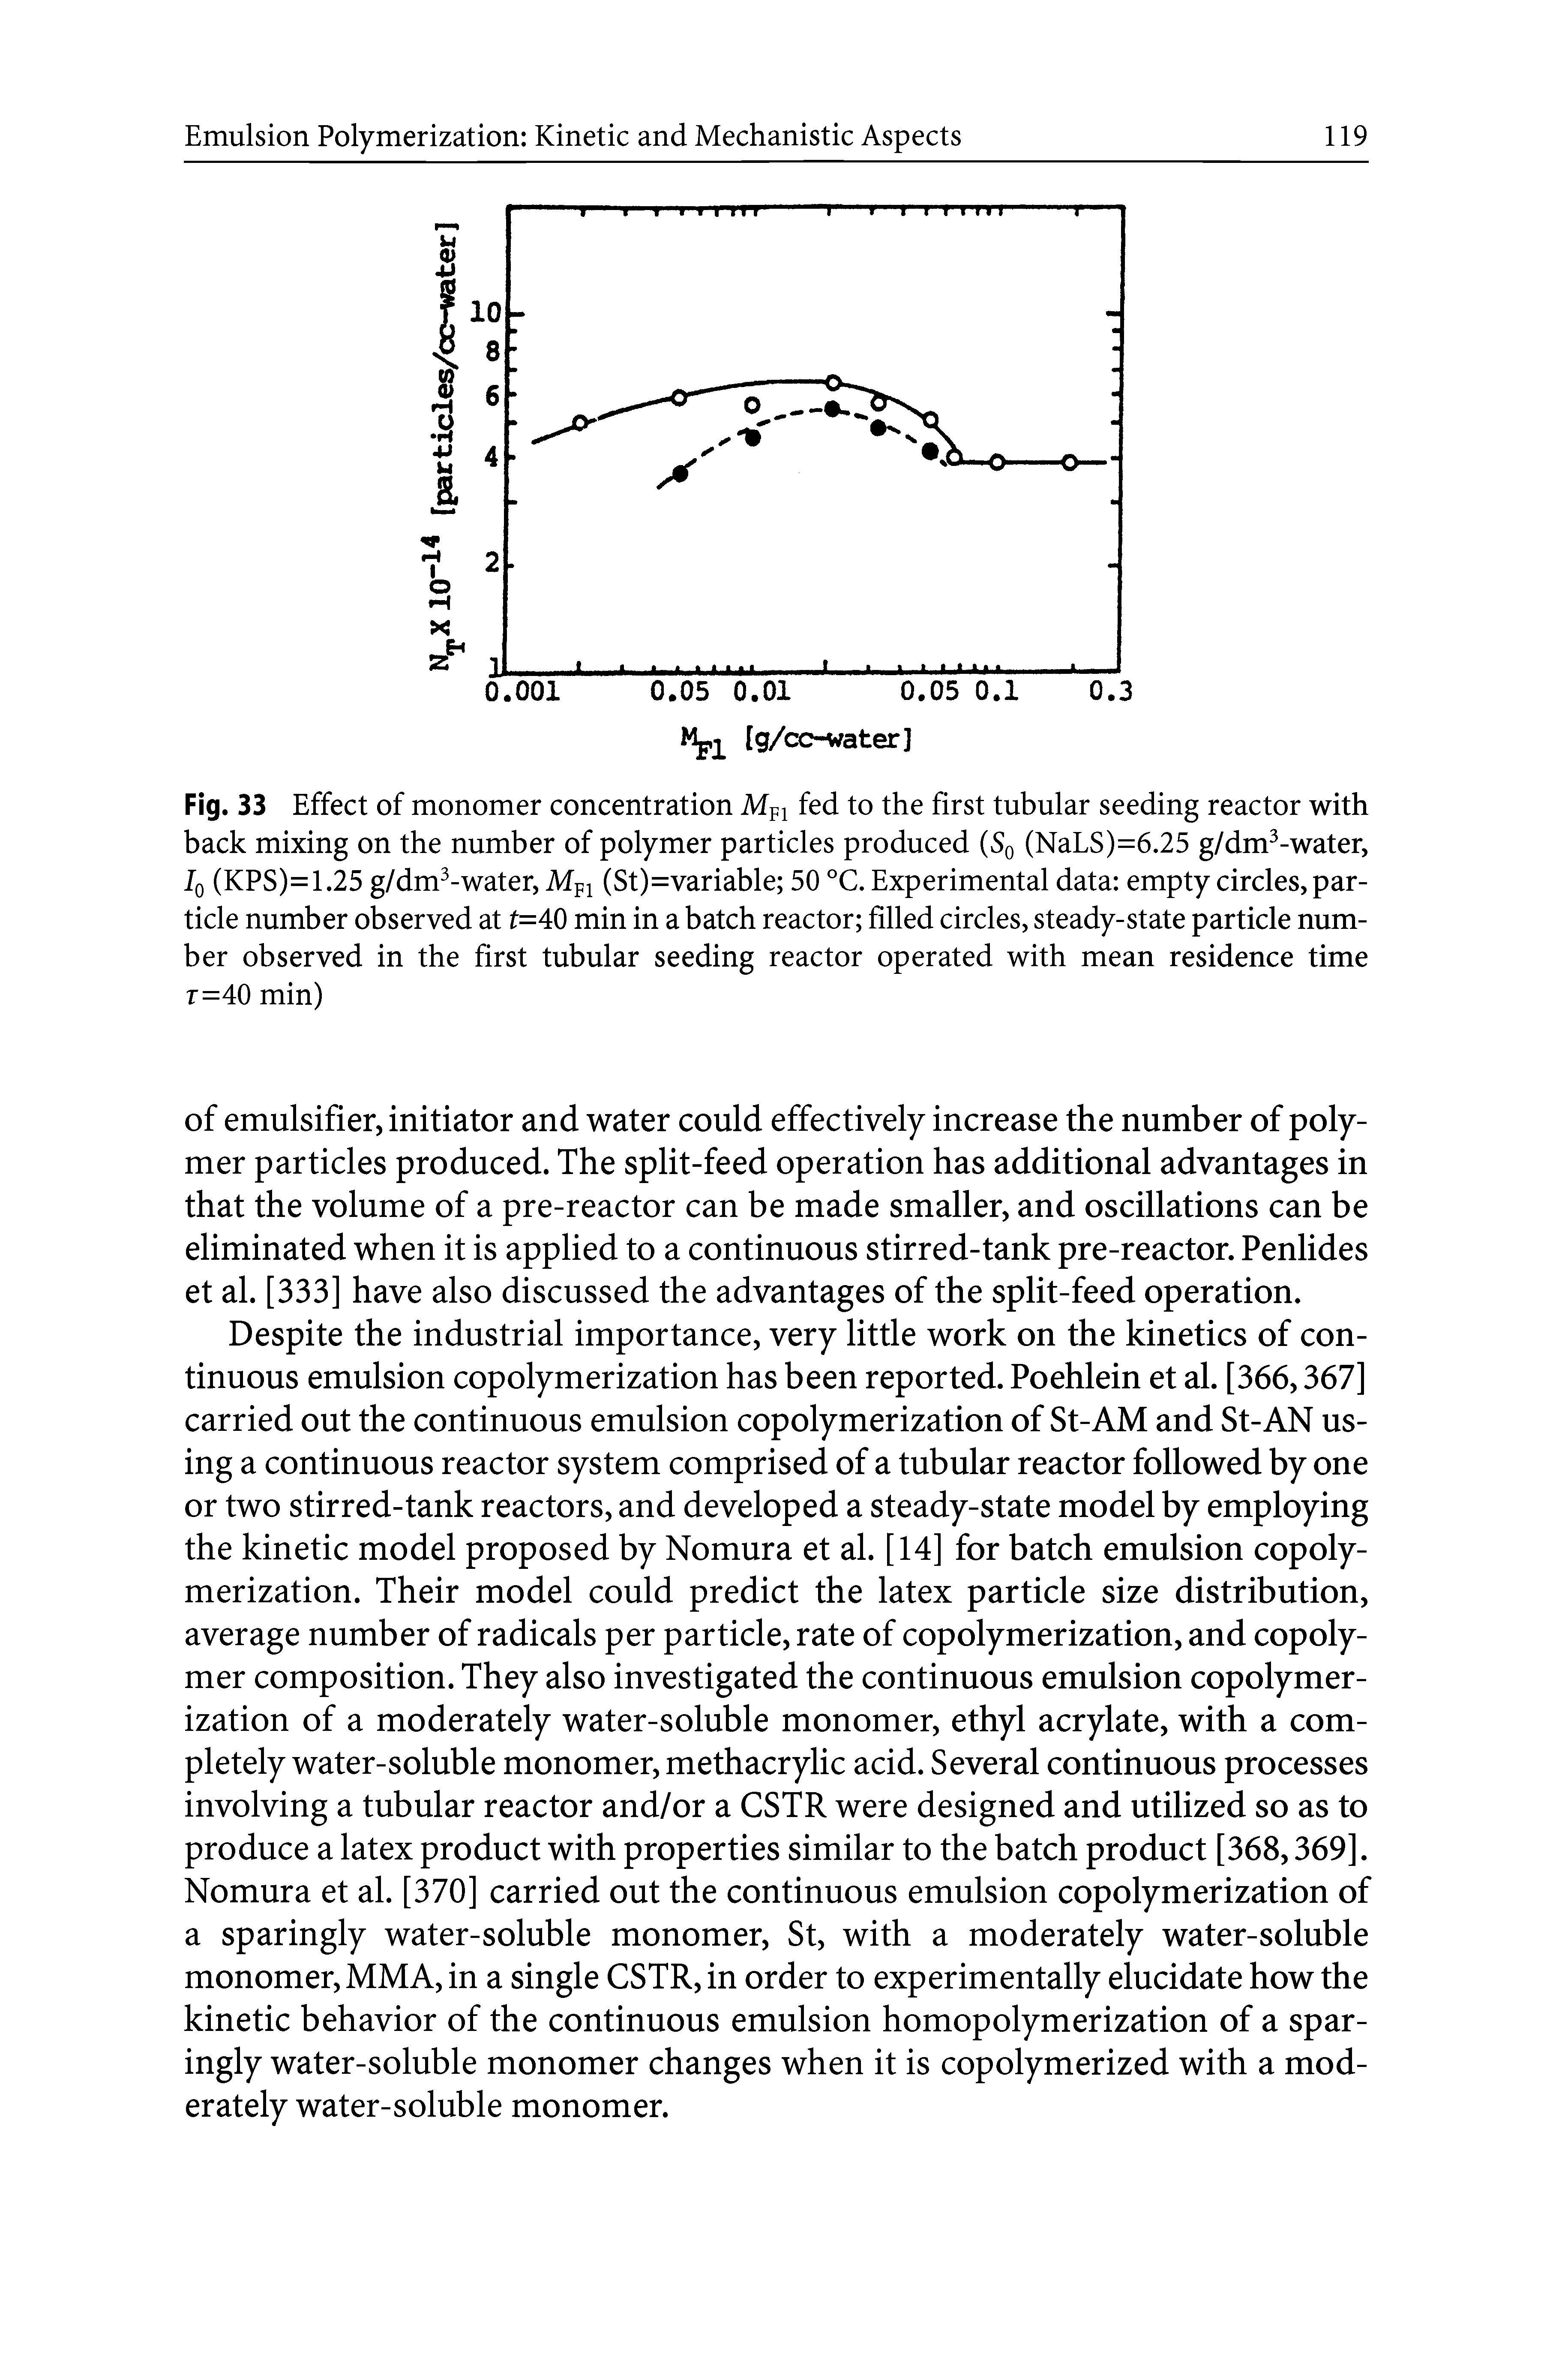 Fig. 33 Effect of monomer concentration Mpi fed to the first tubular seeding reactor with back mixing on the number of polymer particles produced (Sq (NaLS)=6.25 g/dm -water, Iq (KPS)=1.25 g/dm -water, Mpi (St)=variable 50 °C. Experimental data empty circles, particle number observed at t=40 min in a batch reactor filled circles, steady-state particle number observed in the first tubular seeding reactor operated with mean residence time r=40 min)...